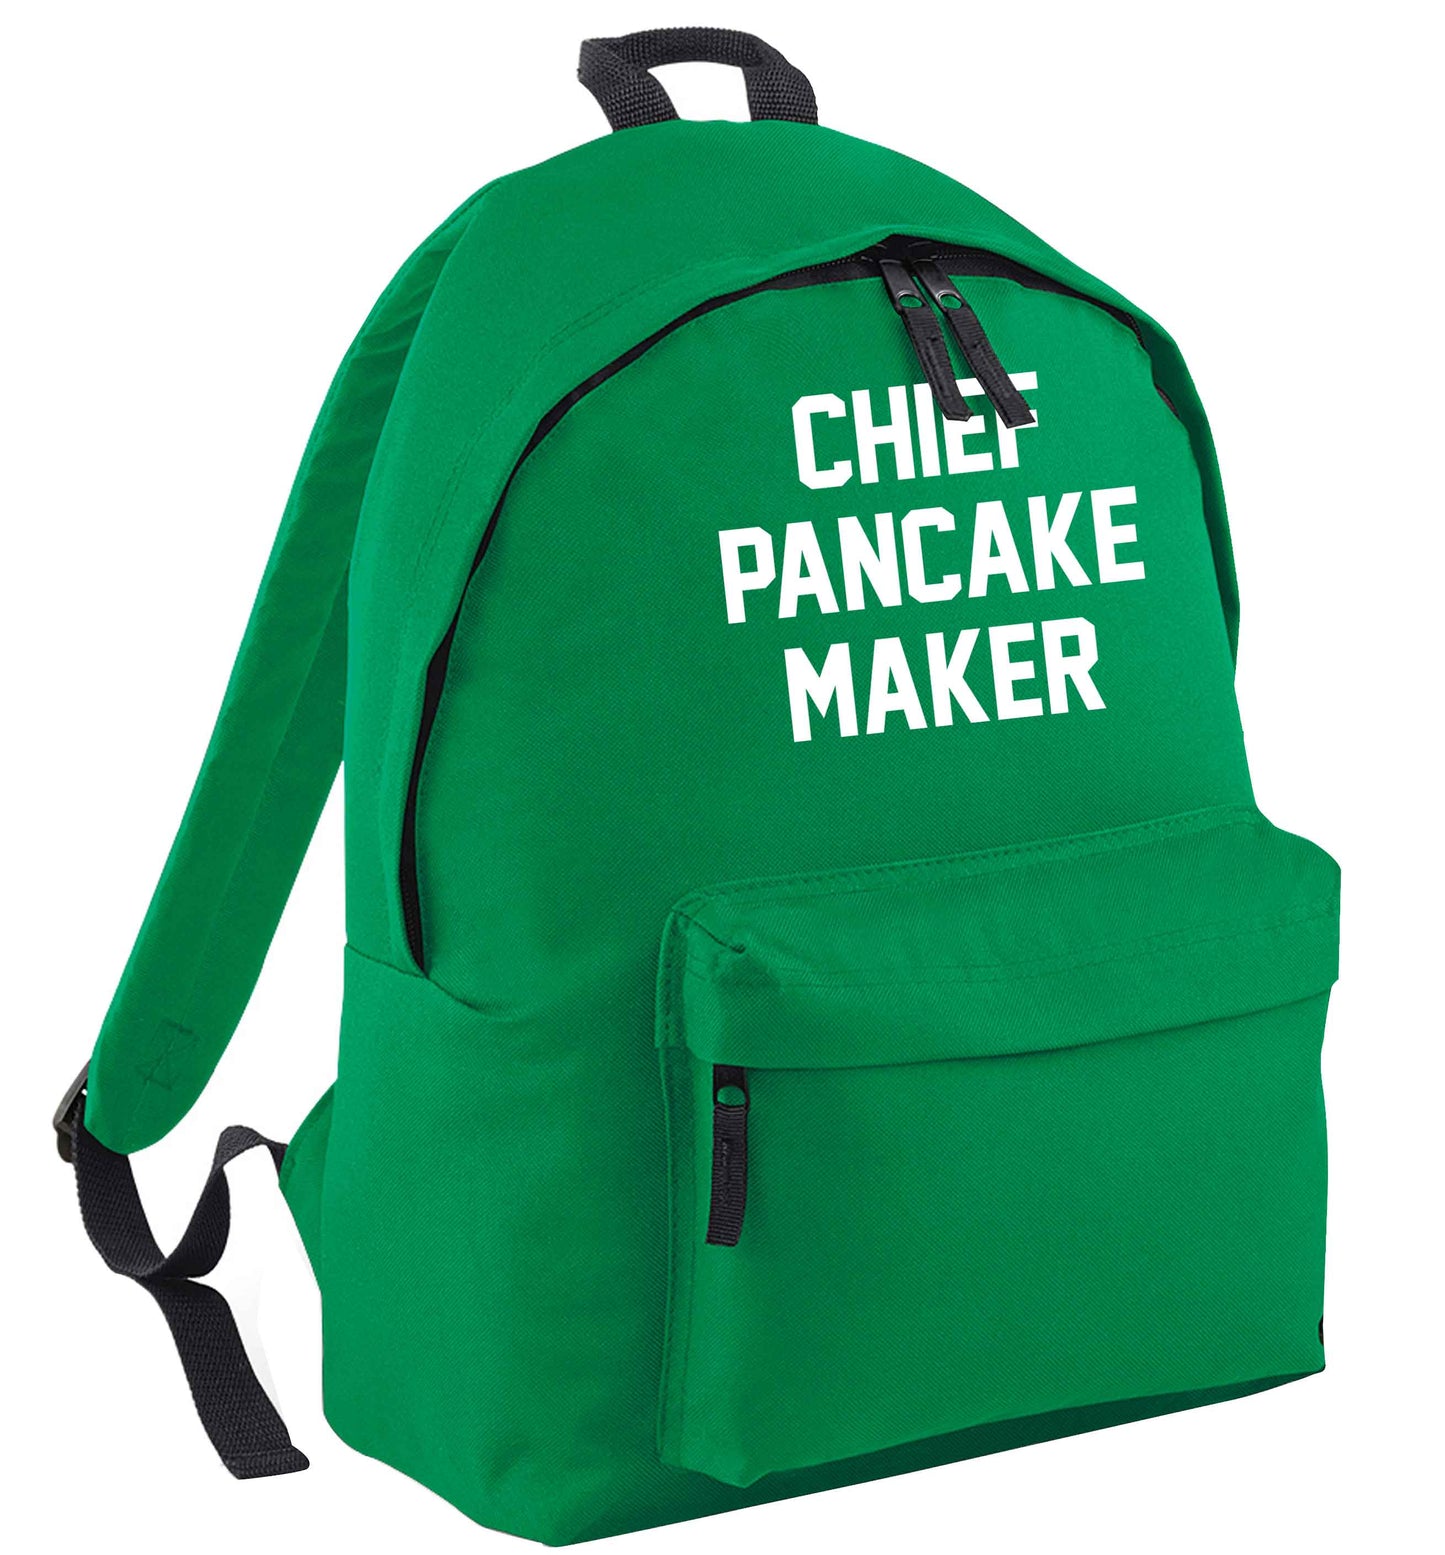 Chief pancake maker green adults backpack